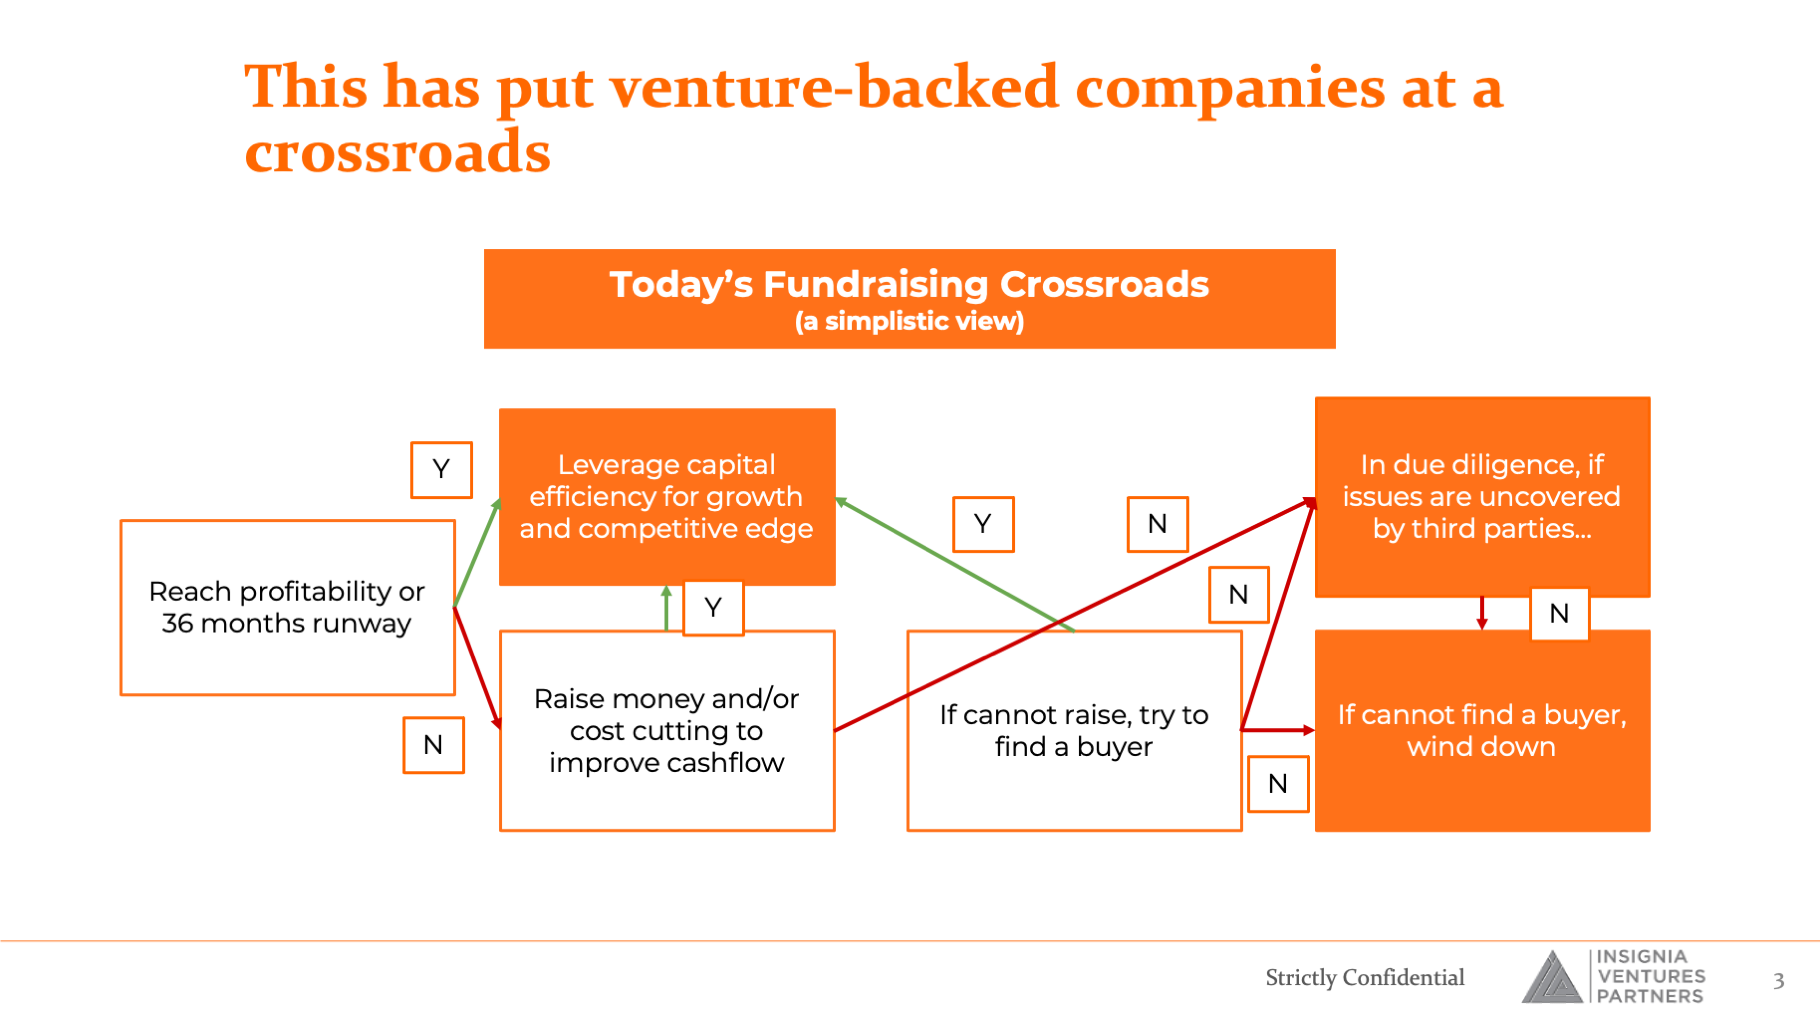 This has put venture-backed companies at a crossroads